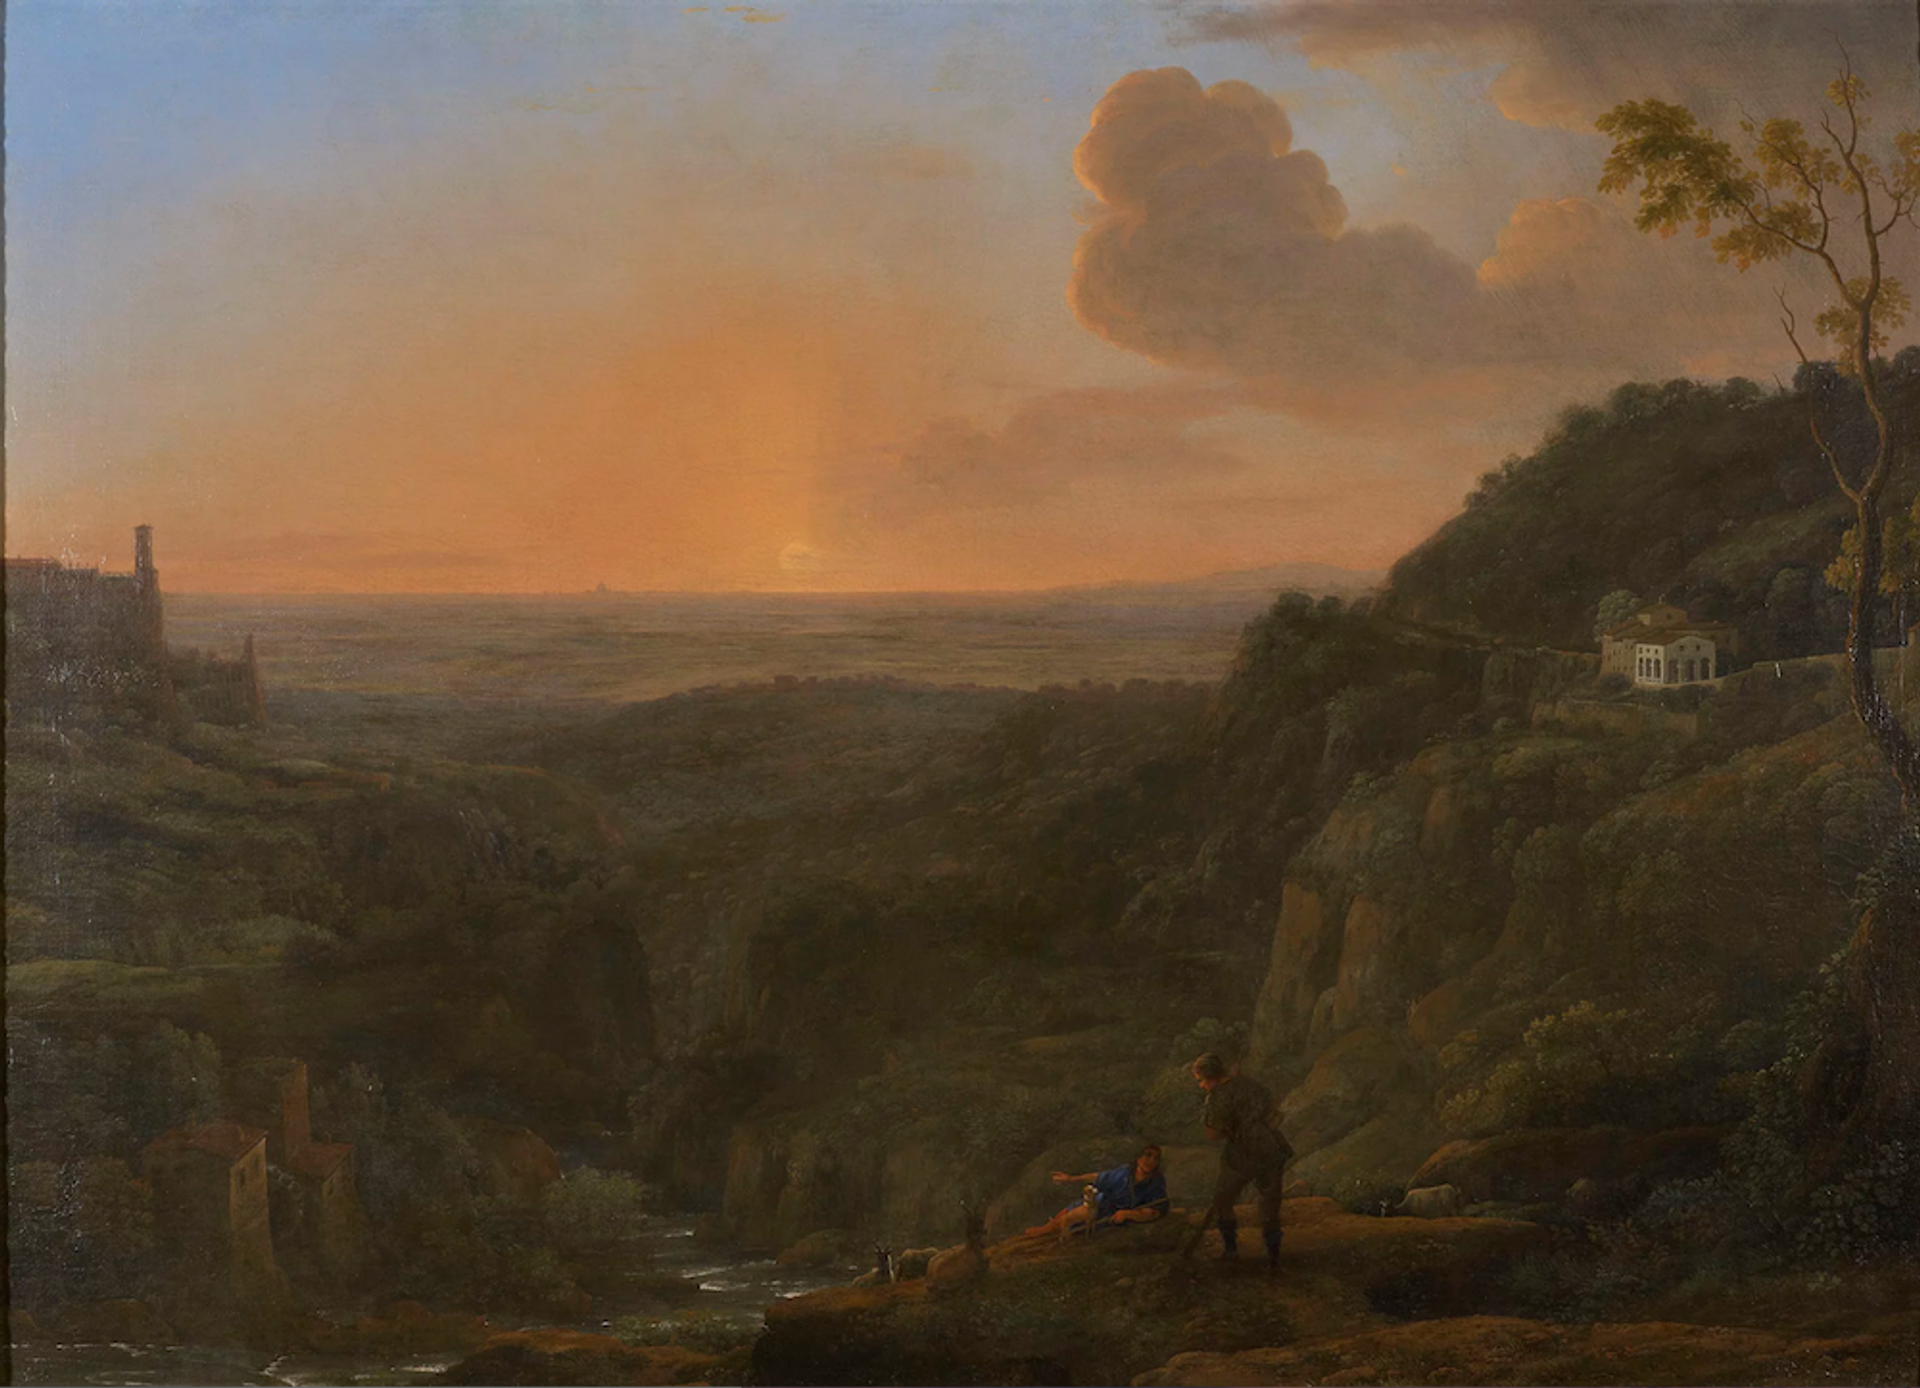 Claude Lorrain, A View of the Campagna from Tivoli, 1645 Royal Collection Trust